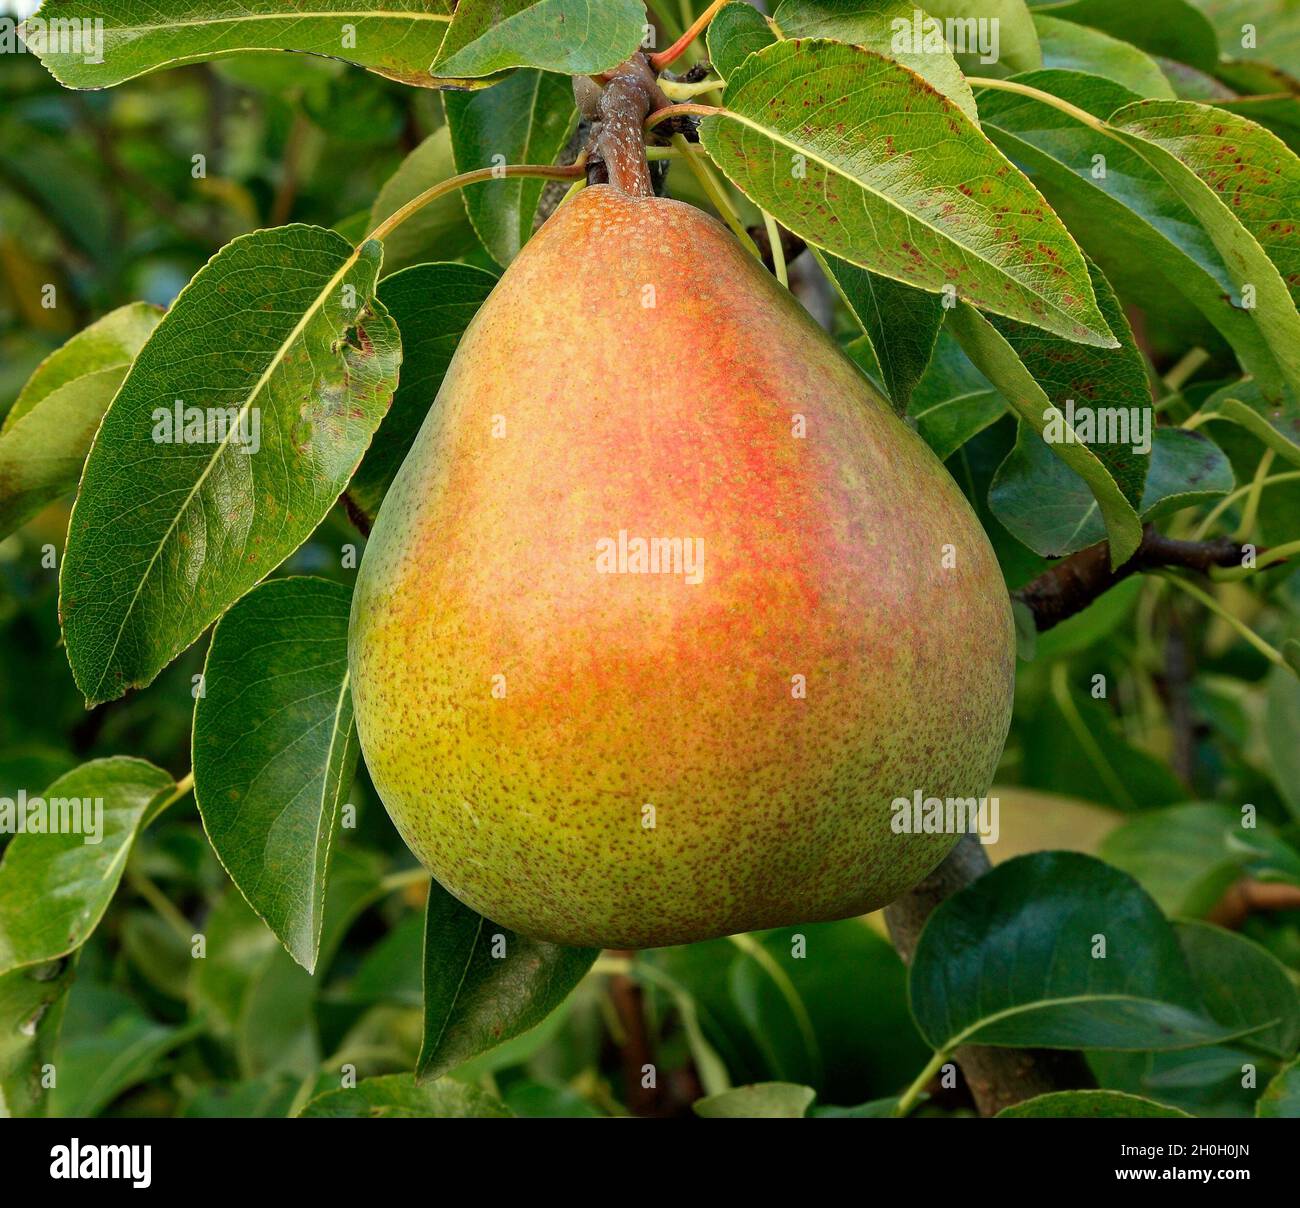 Pear 'Doyenne du Comice', Pyrus communis, pears, fruit, healthy eating, Stock Photo